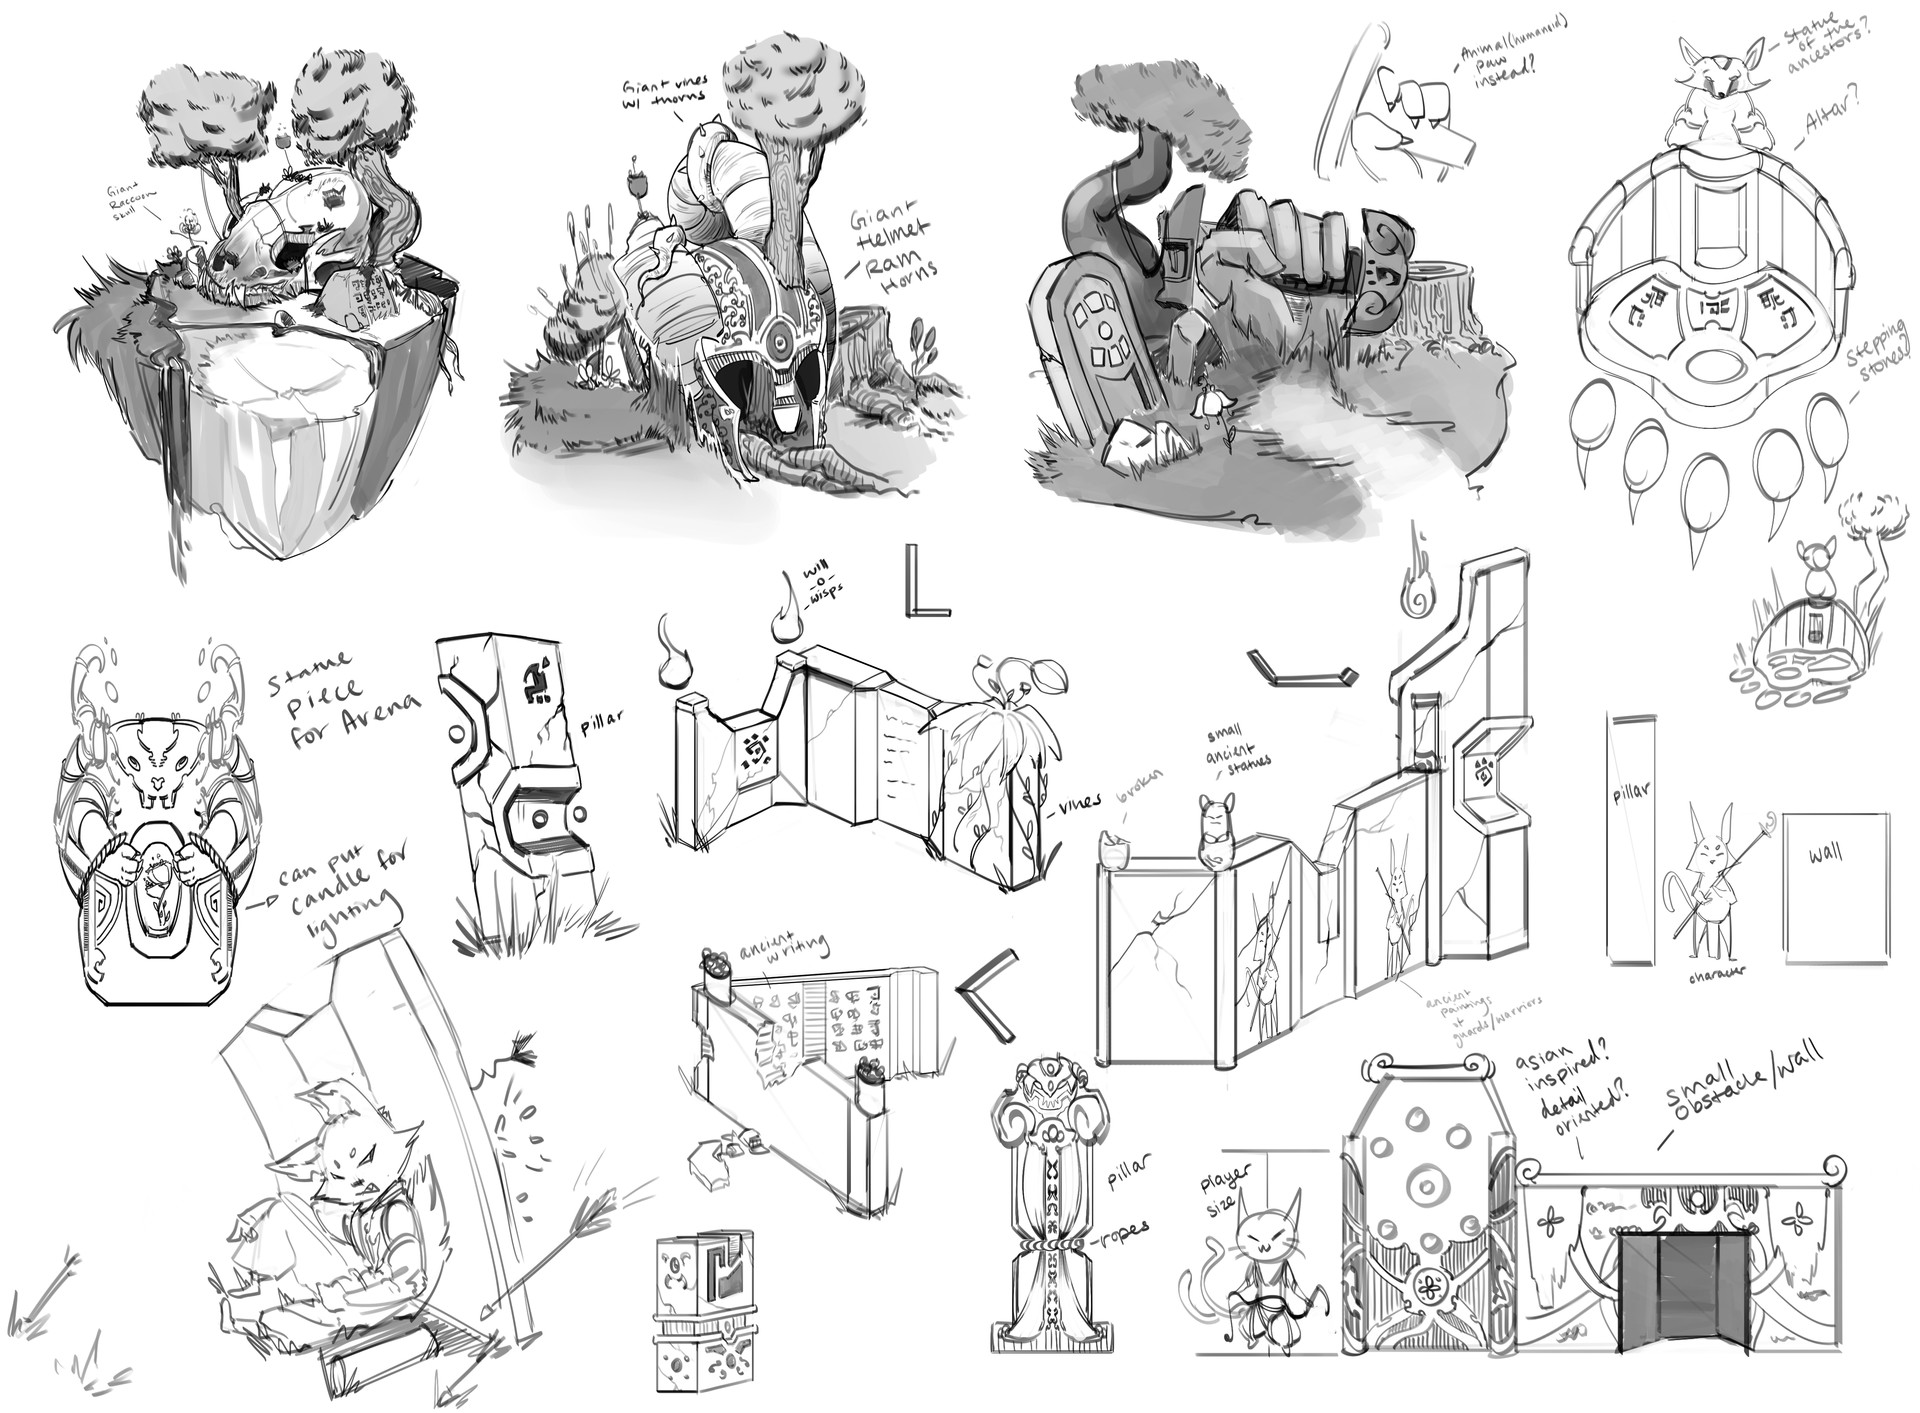 ArtStation - Environment Sketches and Object Exploration